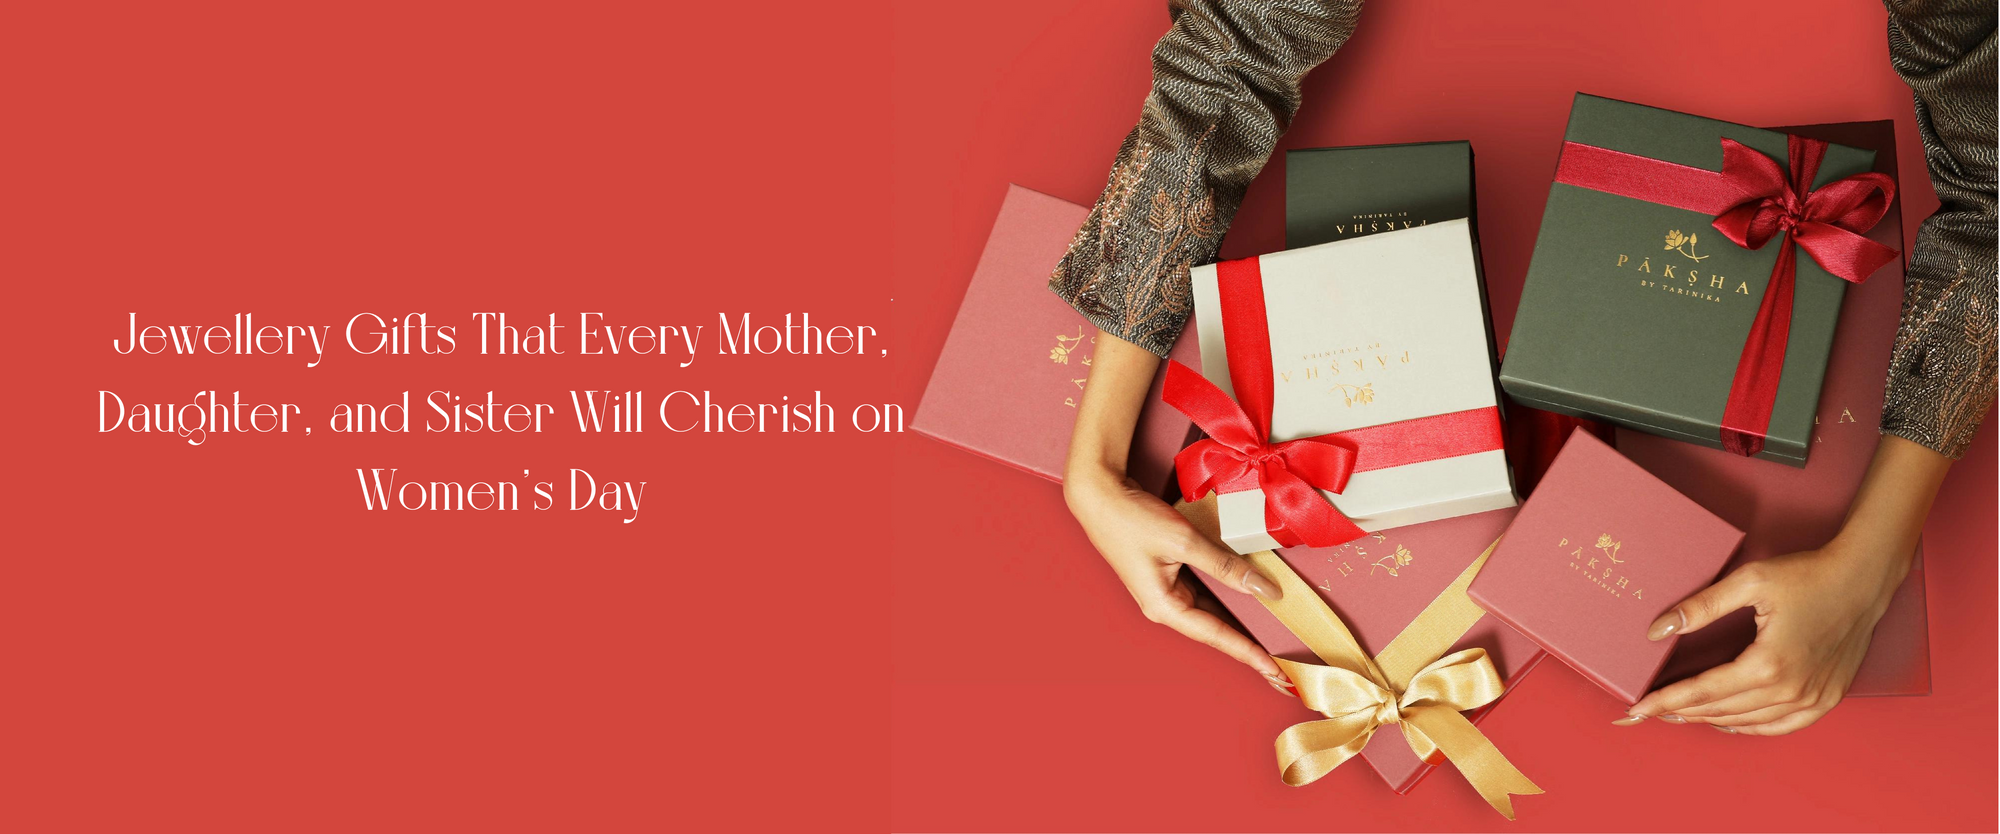 Jewellery Gifts That Every Mother, Daughter, and Sister Will Cherish on Women's Day